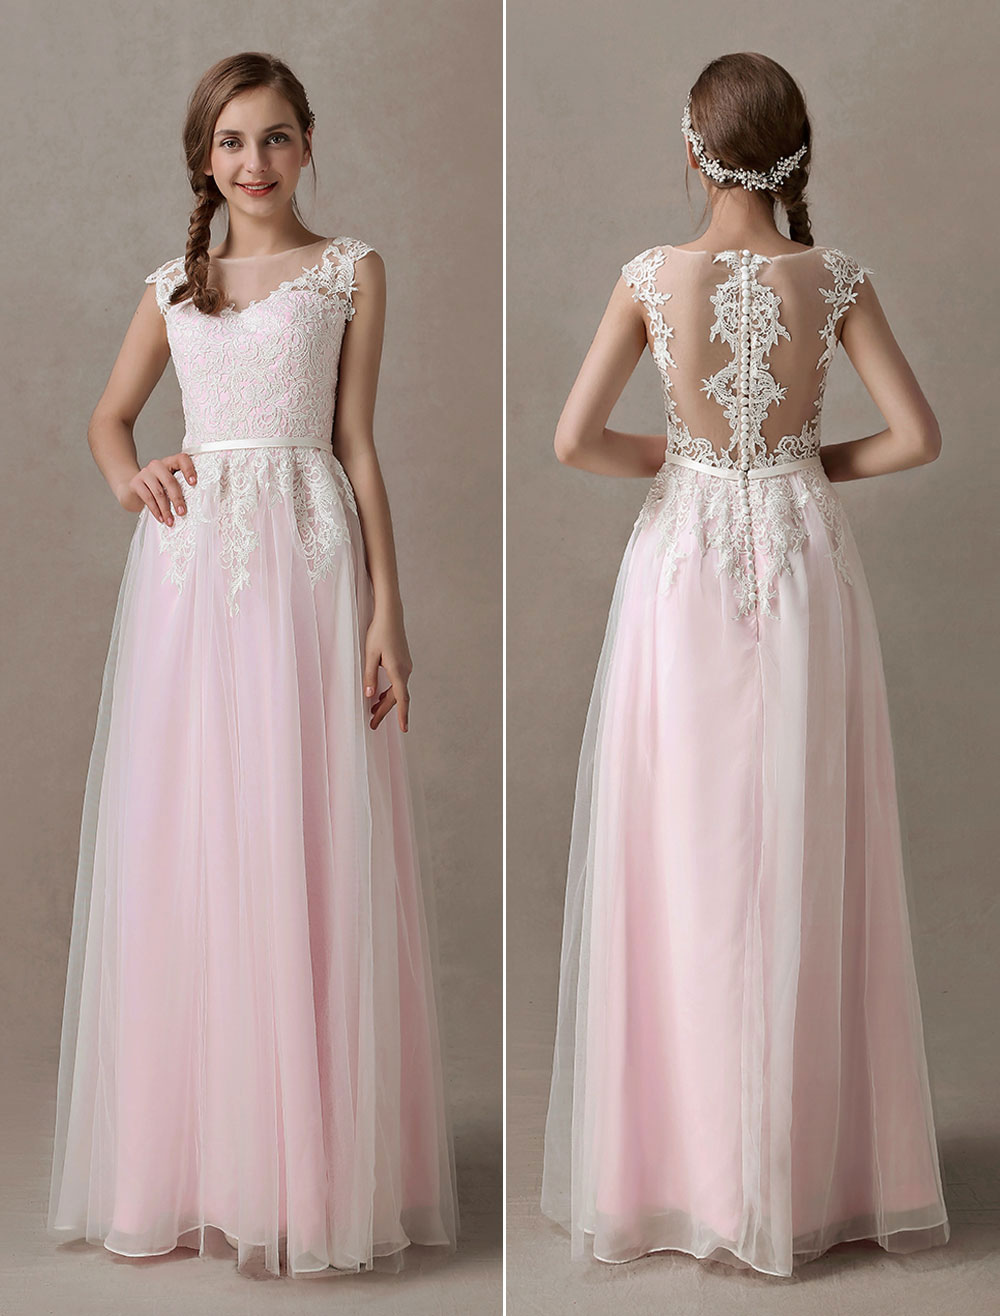 Wedding Dresses Soft Pink Lace Applique Tulle Summer Beach Bridal